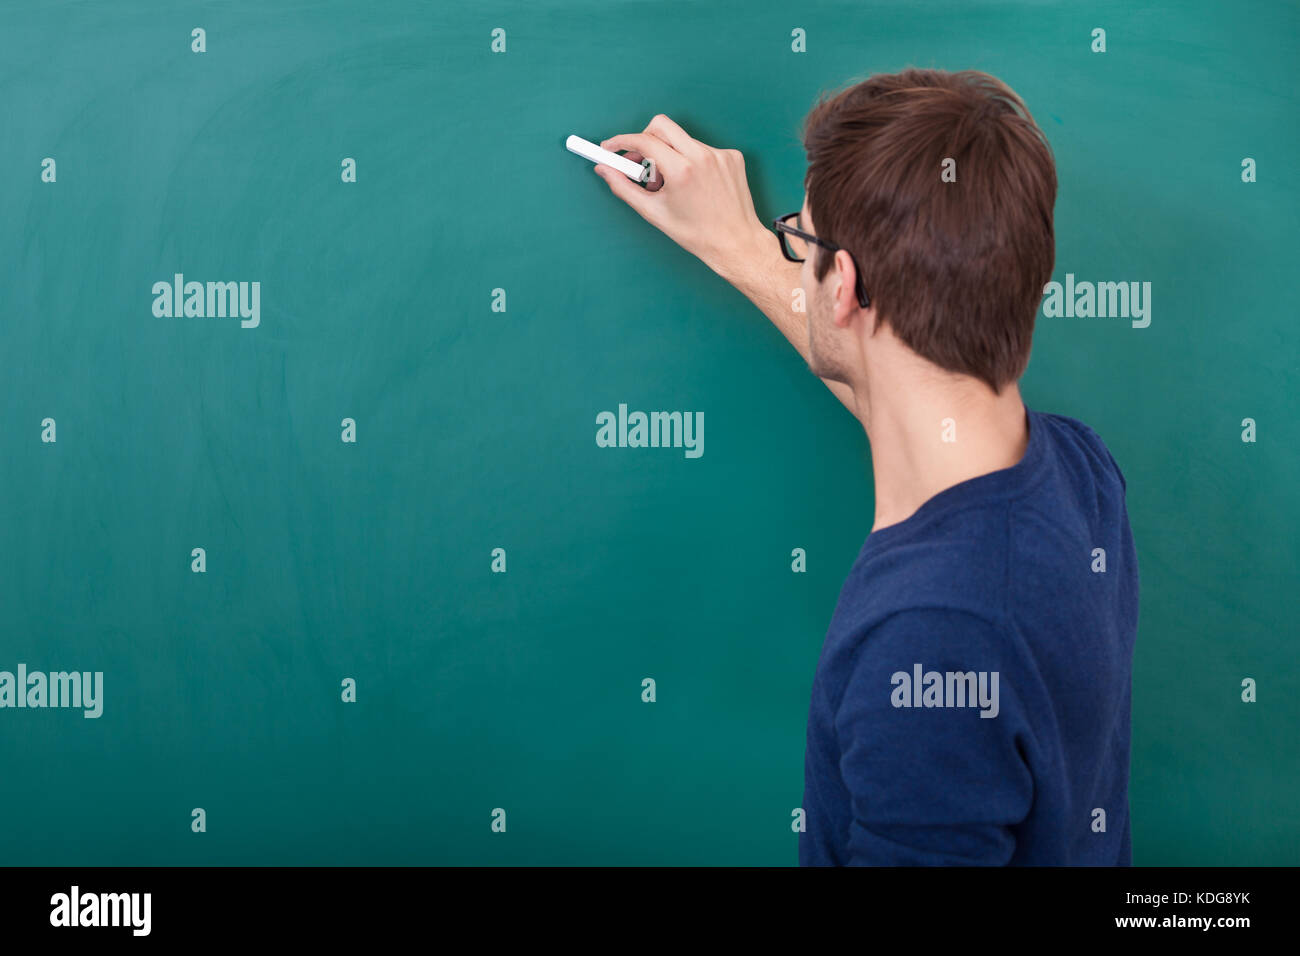 Rear View Of A Male Student Writing On Chalkboard With Chalk Stock Photo